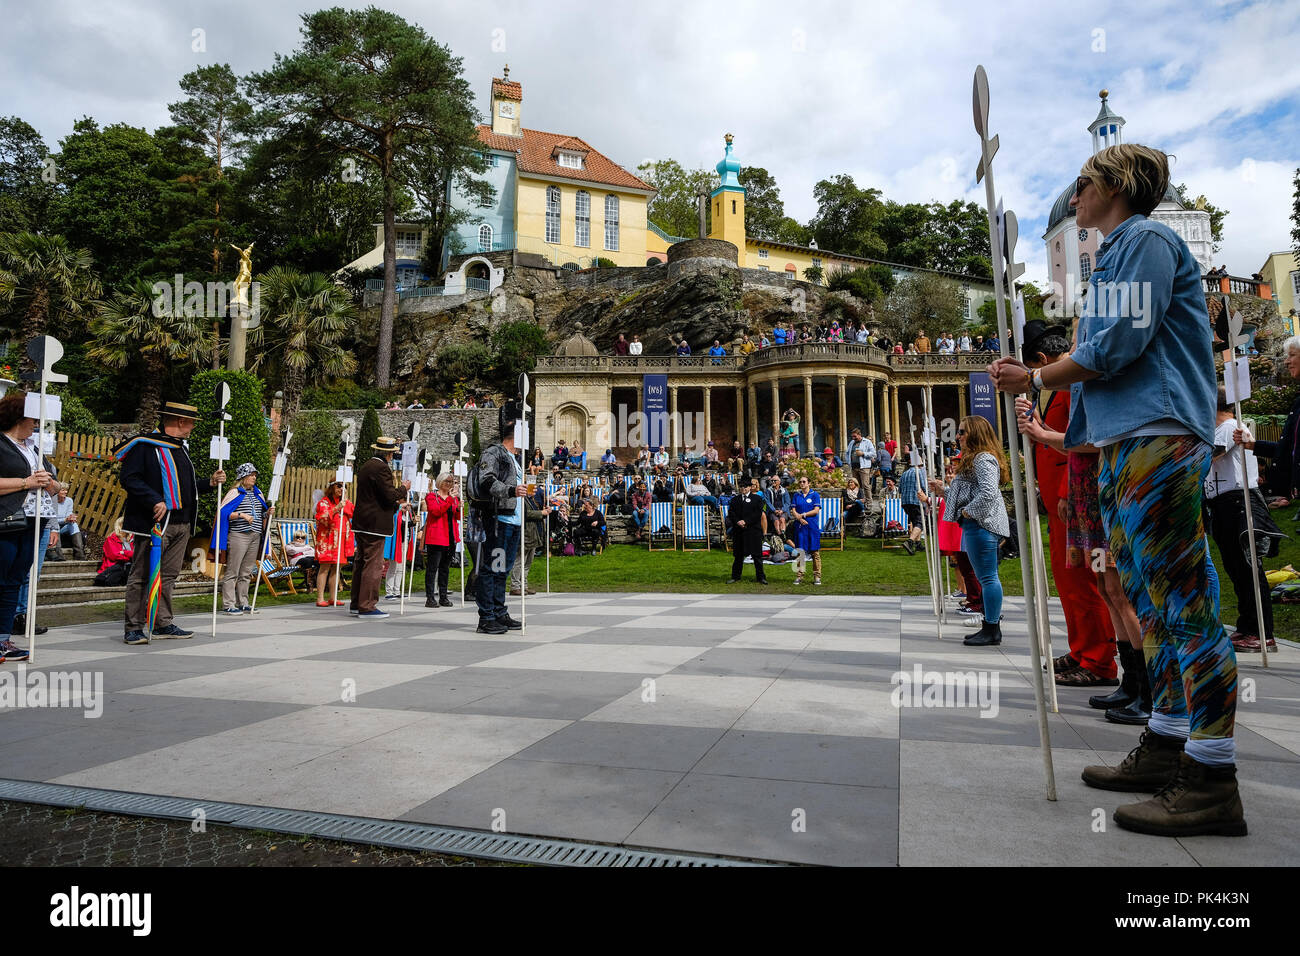 Human Chess from The Prisoner at Festival No 6 on Friday 7 September 2018 held at Portmeirion, Gwynedd, North Wales.  Pictured: The Six of One society play out a famous scene from the Episoce 'Checkmate' from TV series The Prisoner on a permanent chess board laid out for the purpose in the Central Piazza. Picture by Julie Edwards. Stock Photo